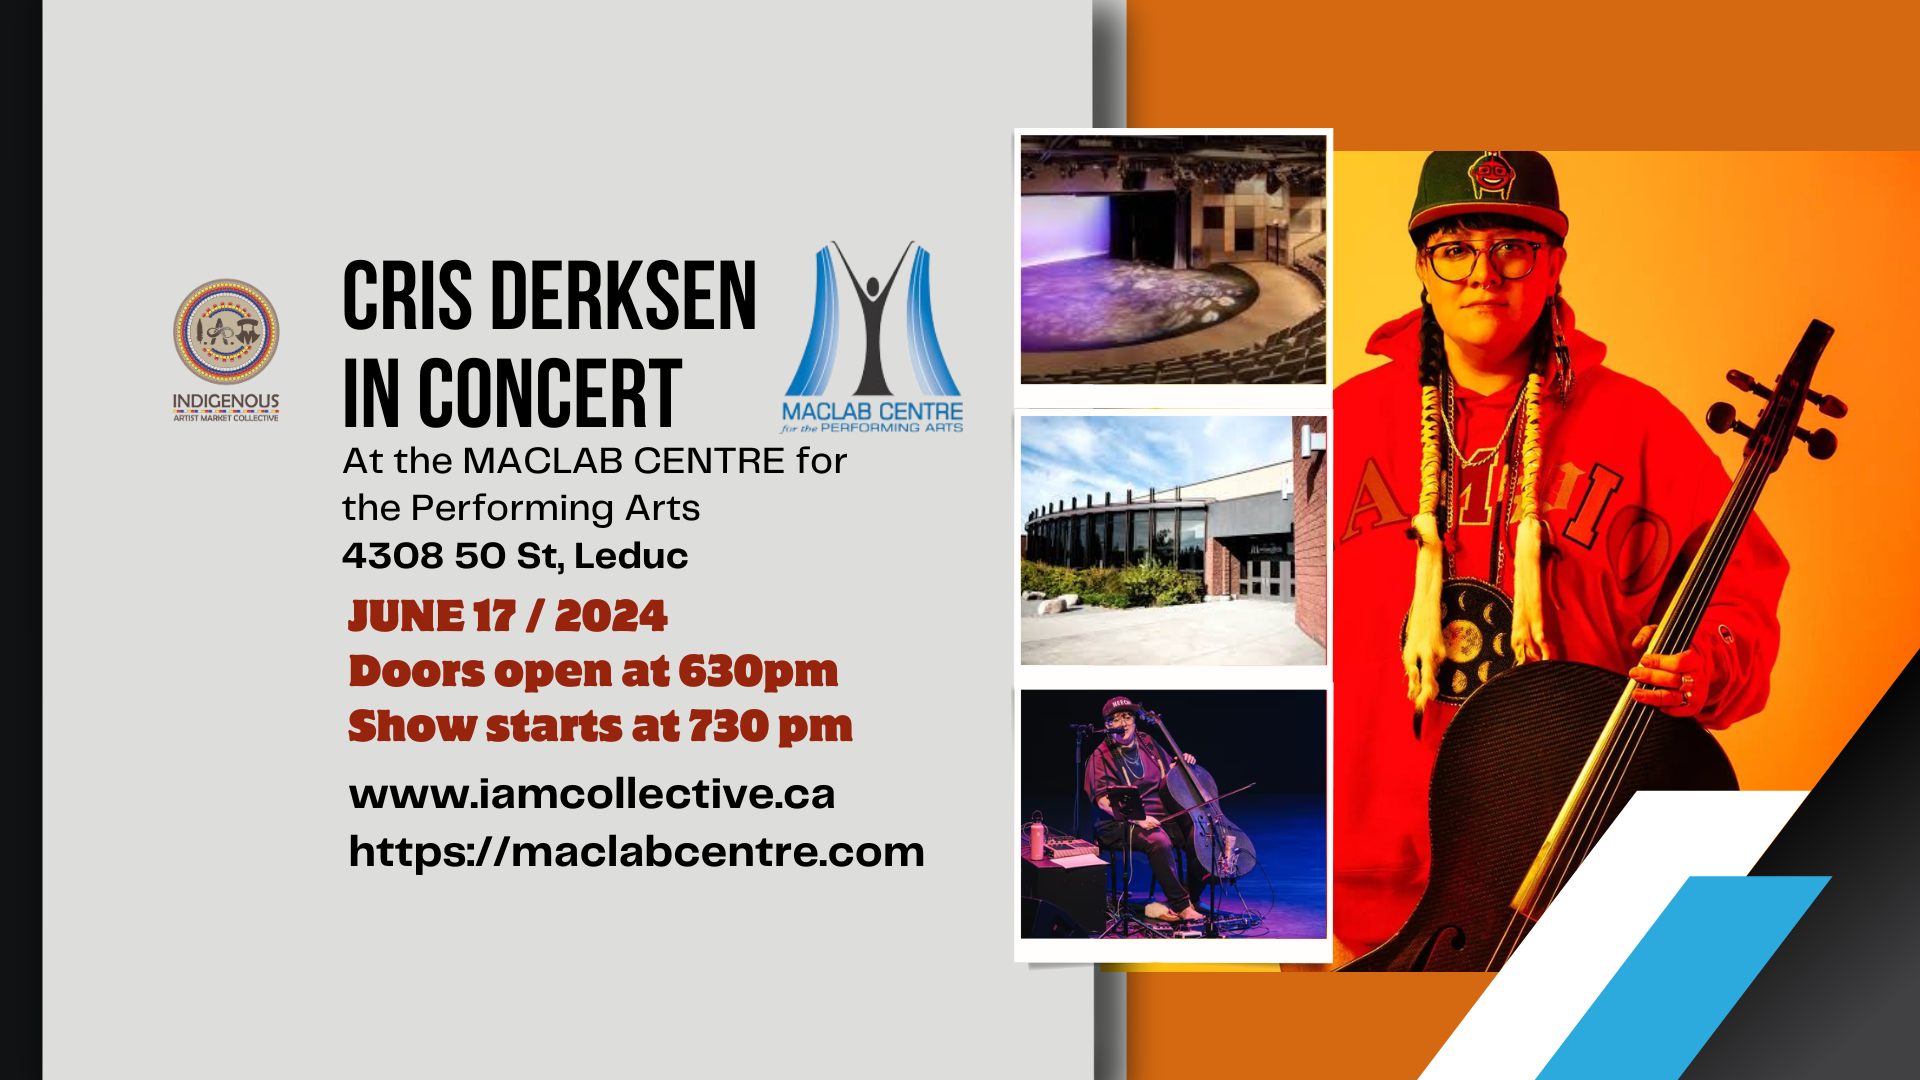 Featured image for “Cris Derksen in Concert as part of the MacLab Indigenous Series”